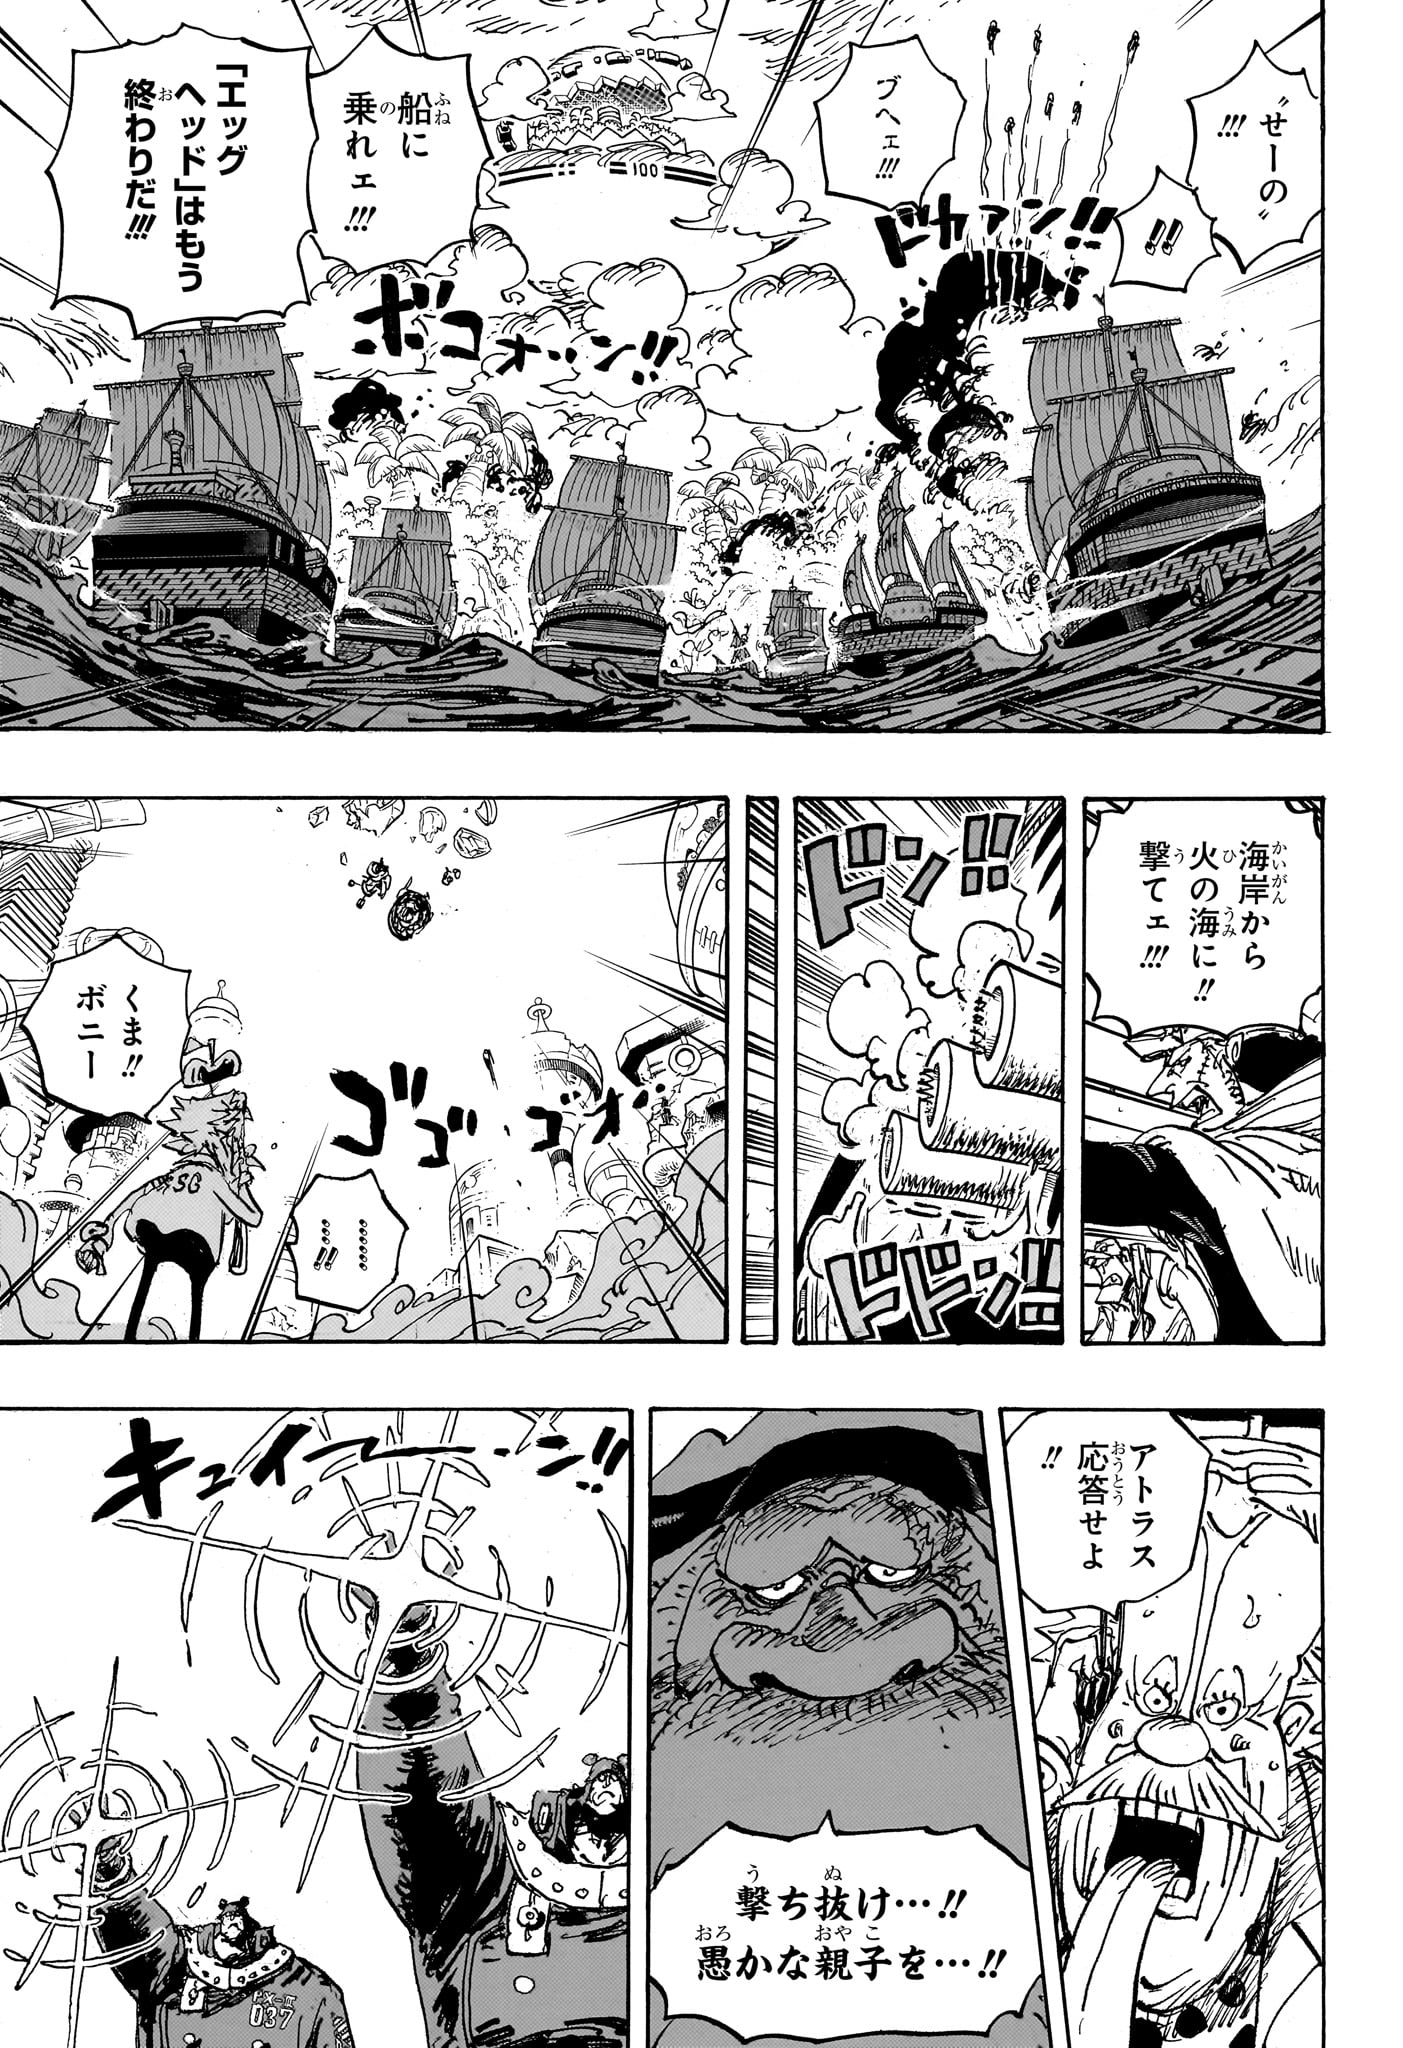 One Piece - Chapter 1106 - Page 3